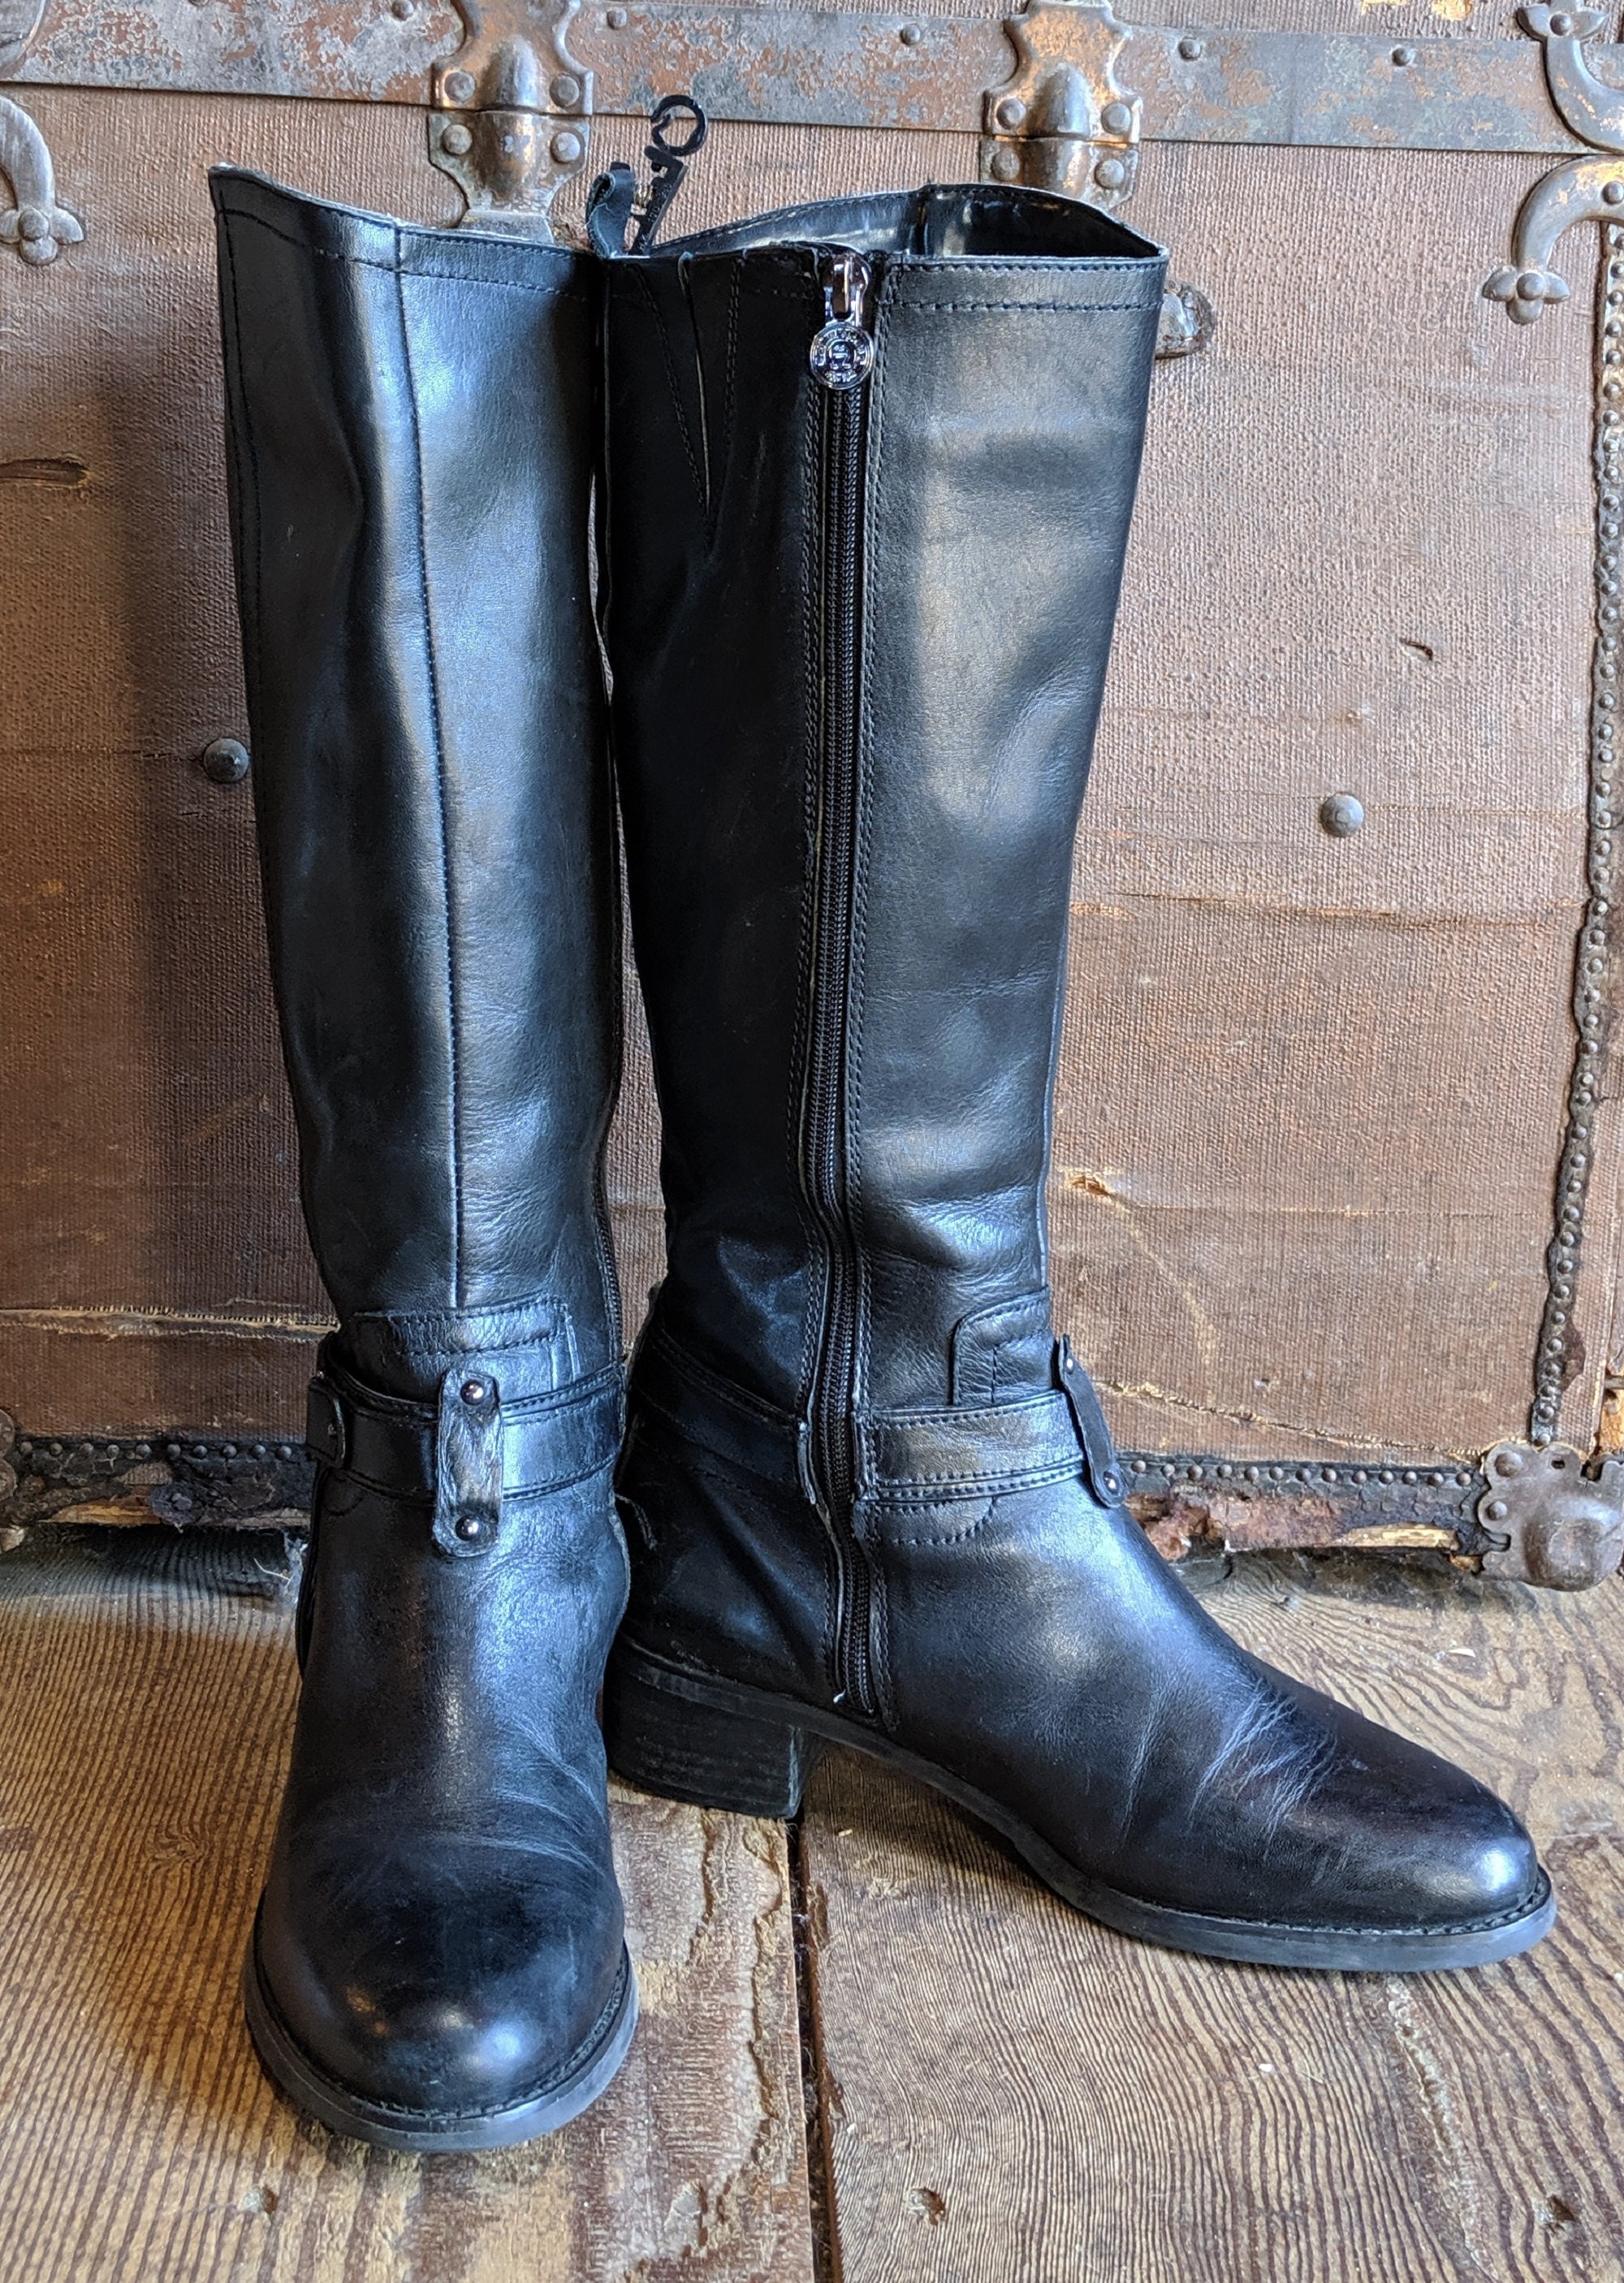 Vintage Riding Boots Etienne Aigner Tall Leather Equestrian lining